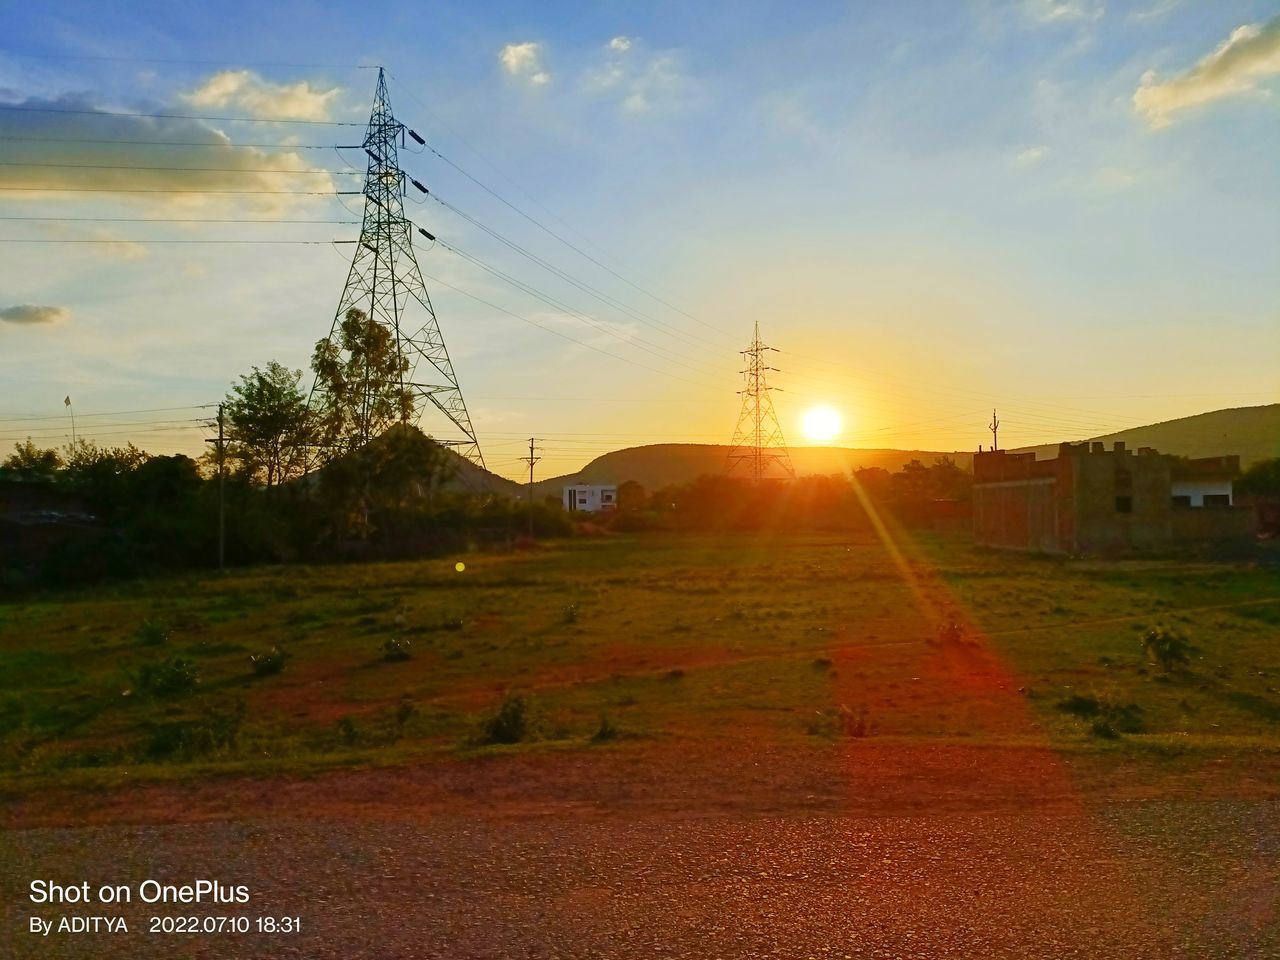 sky, sunset, horizon, sunlight, nature, sun, cloud, electricity, field, landscape, technology, evening, environment, electricity pylon, dusk, lens flare, plain, plant, architecture, cable, no people, tree, sunbeam, rural area, built structure, land, beauty in nature, power generation, hill, grass, power line, scenics - nature, power supply, transportation, outdoors, orange color, afterglow, tranquility, road, rural scene, agriculture